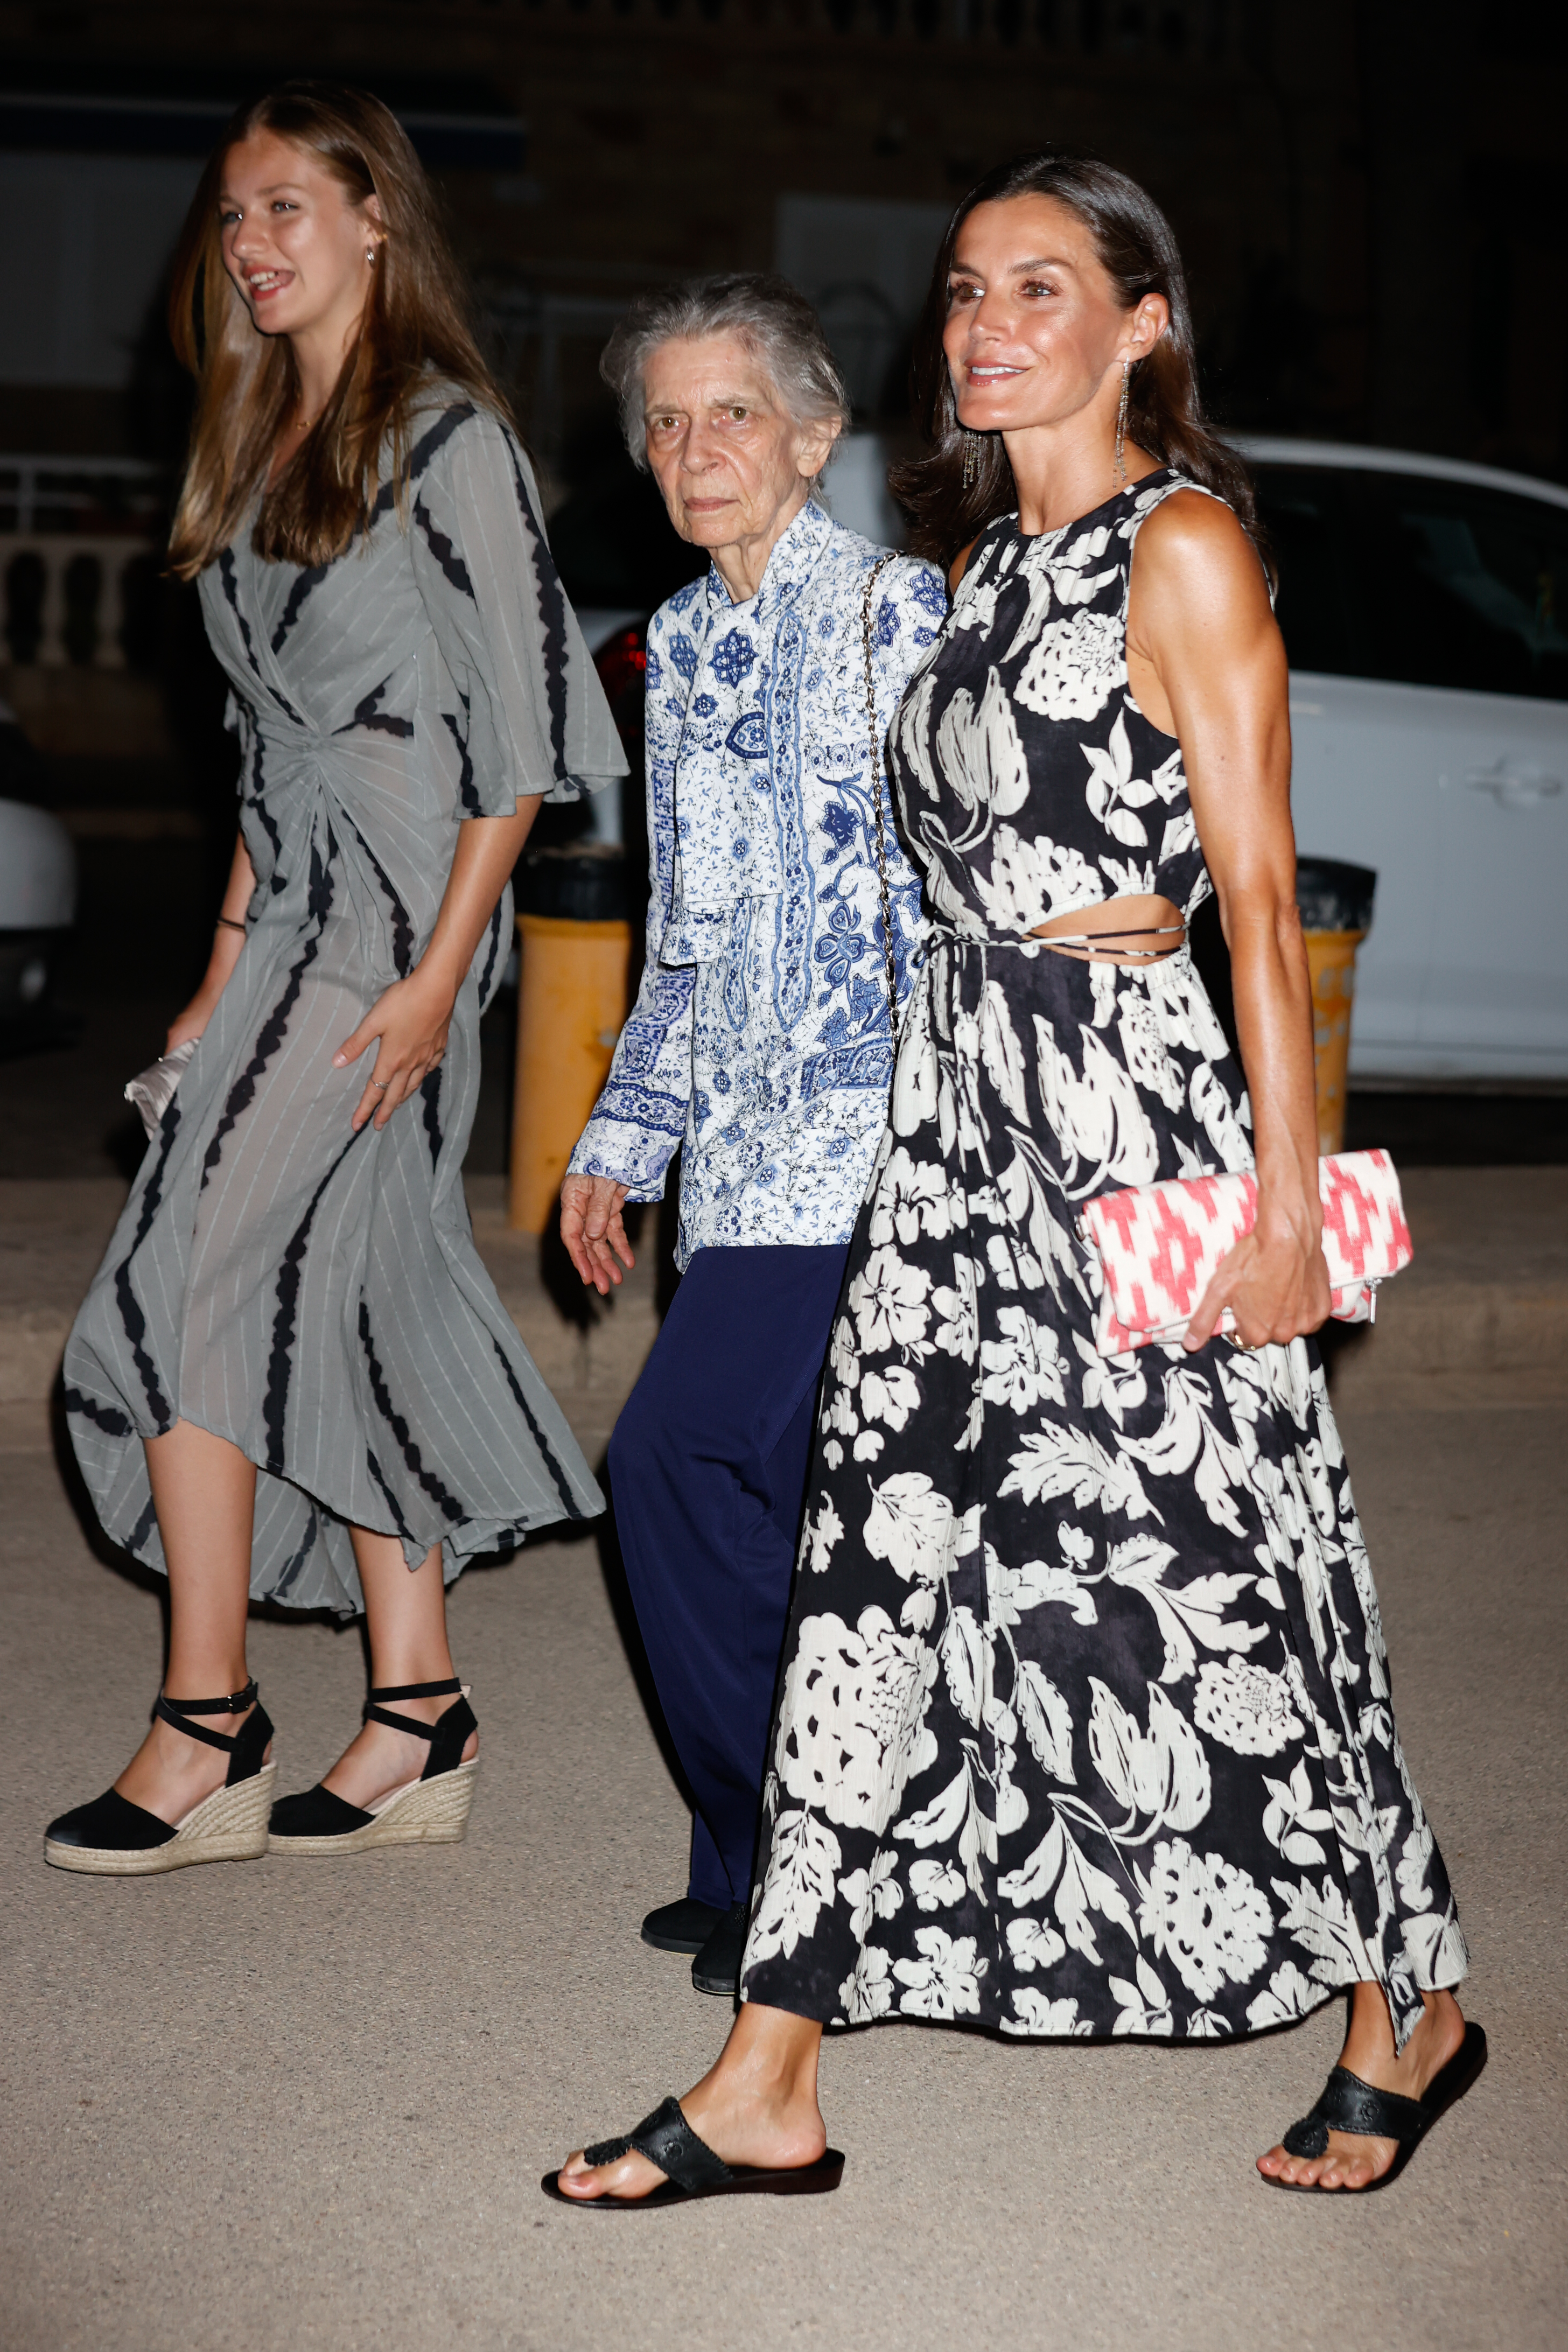 Queen Letizia surprises in Mallorca with a cut out dress and Leonor and Sof